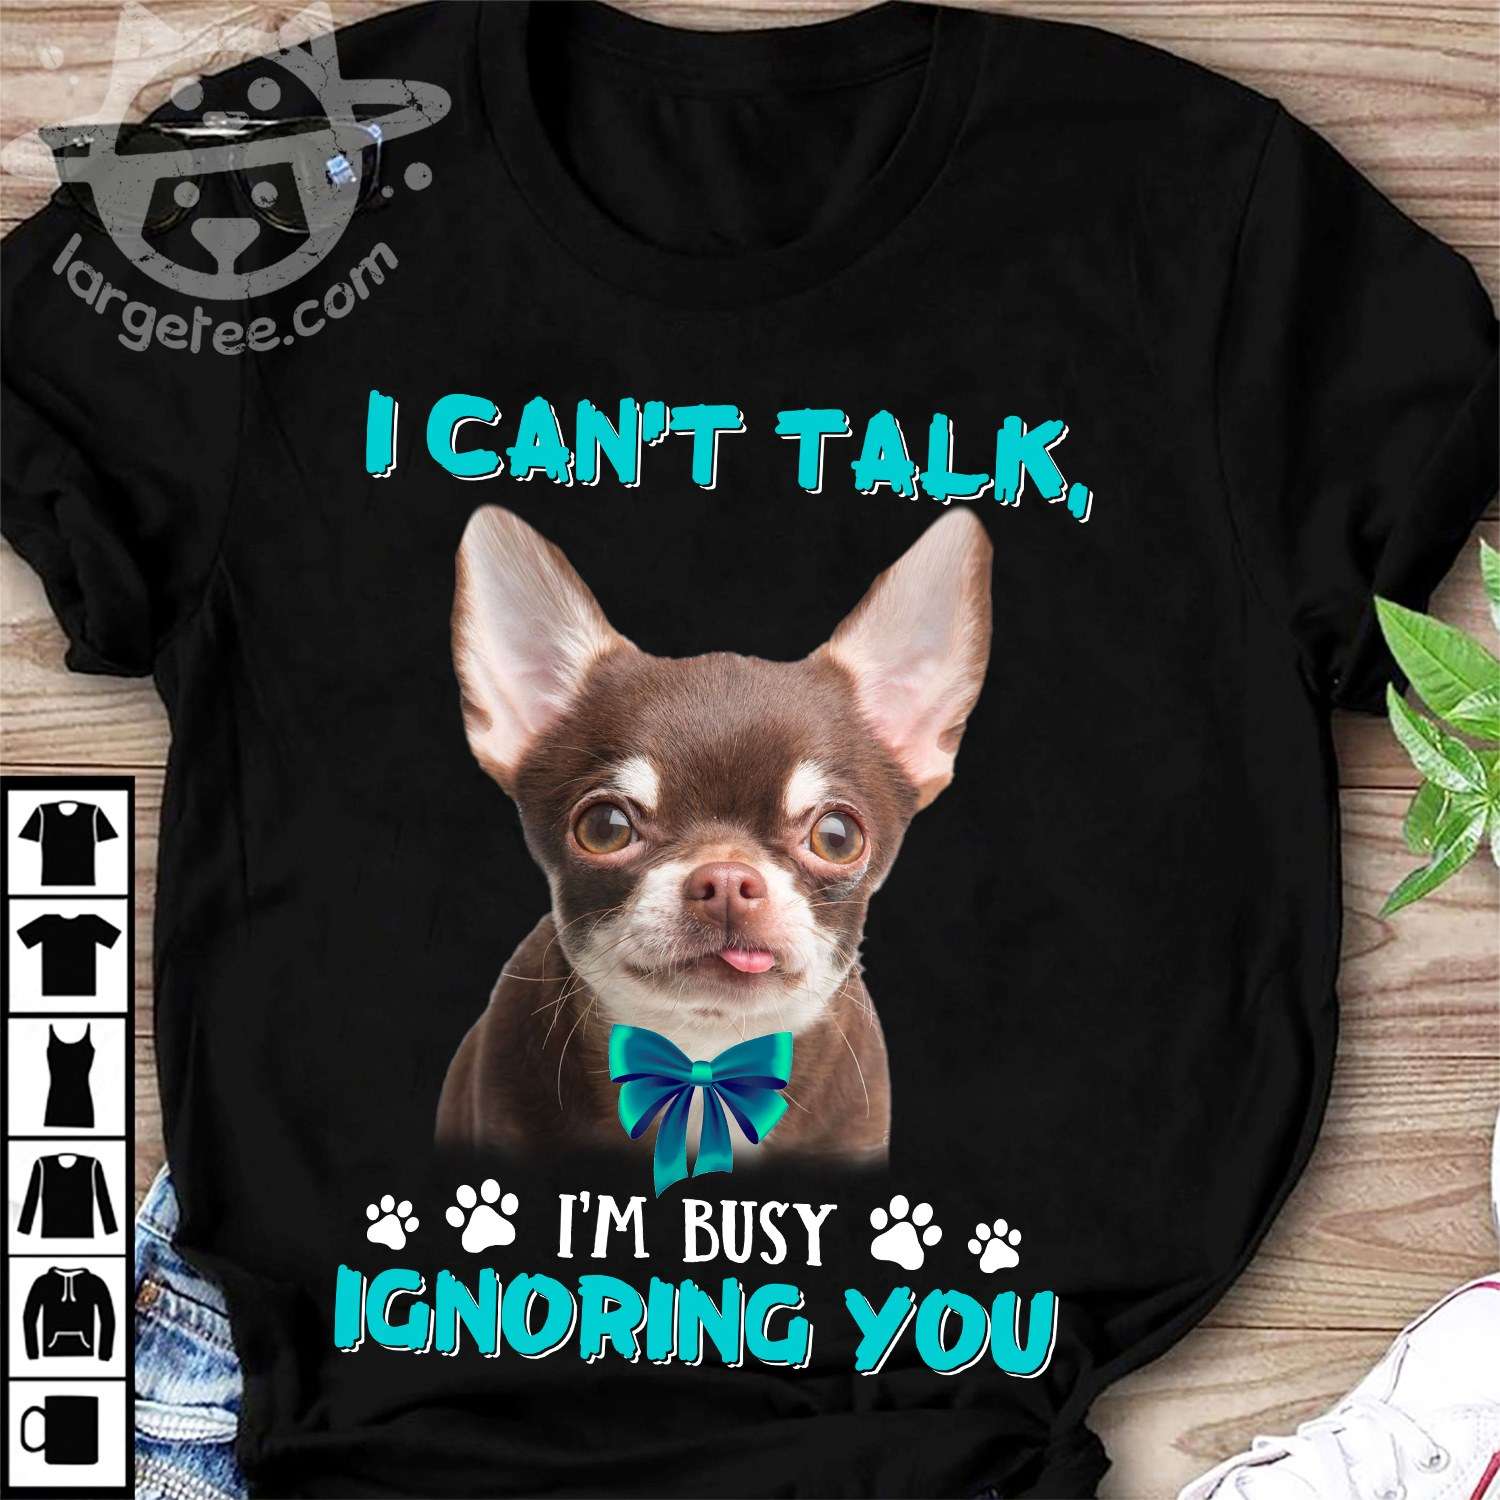 I can't talk, I'm busy ignoring you - Chihuahua puppy